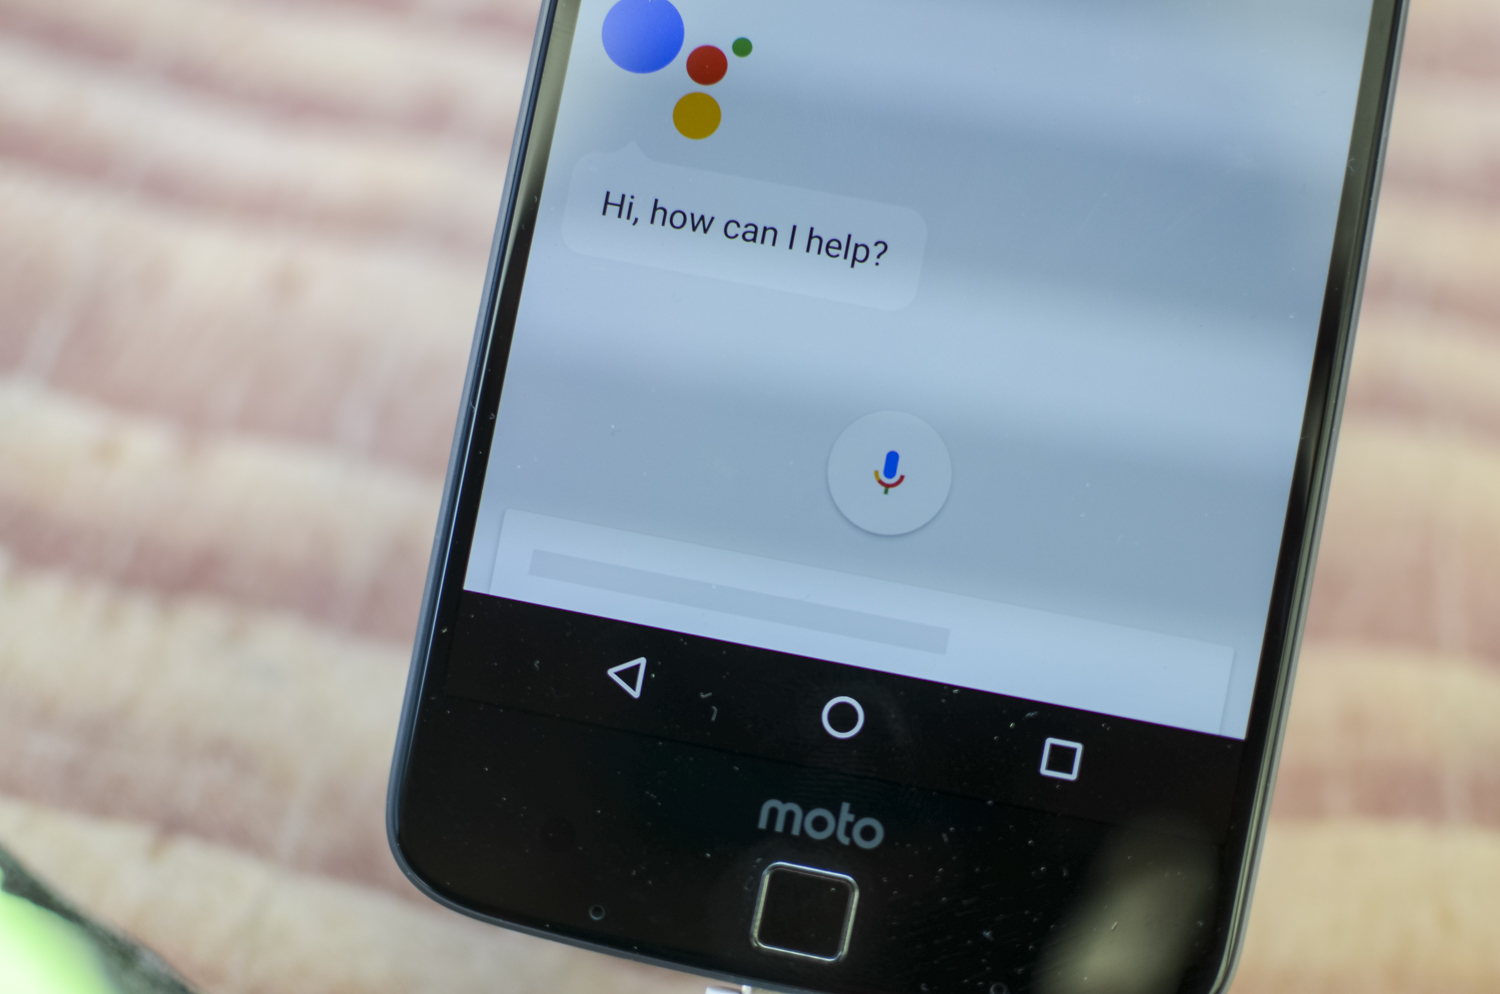 45 Funny Google Assistant Commands That Will Crack You Up